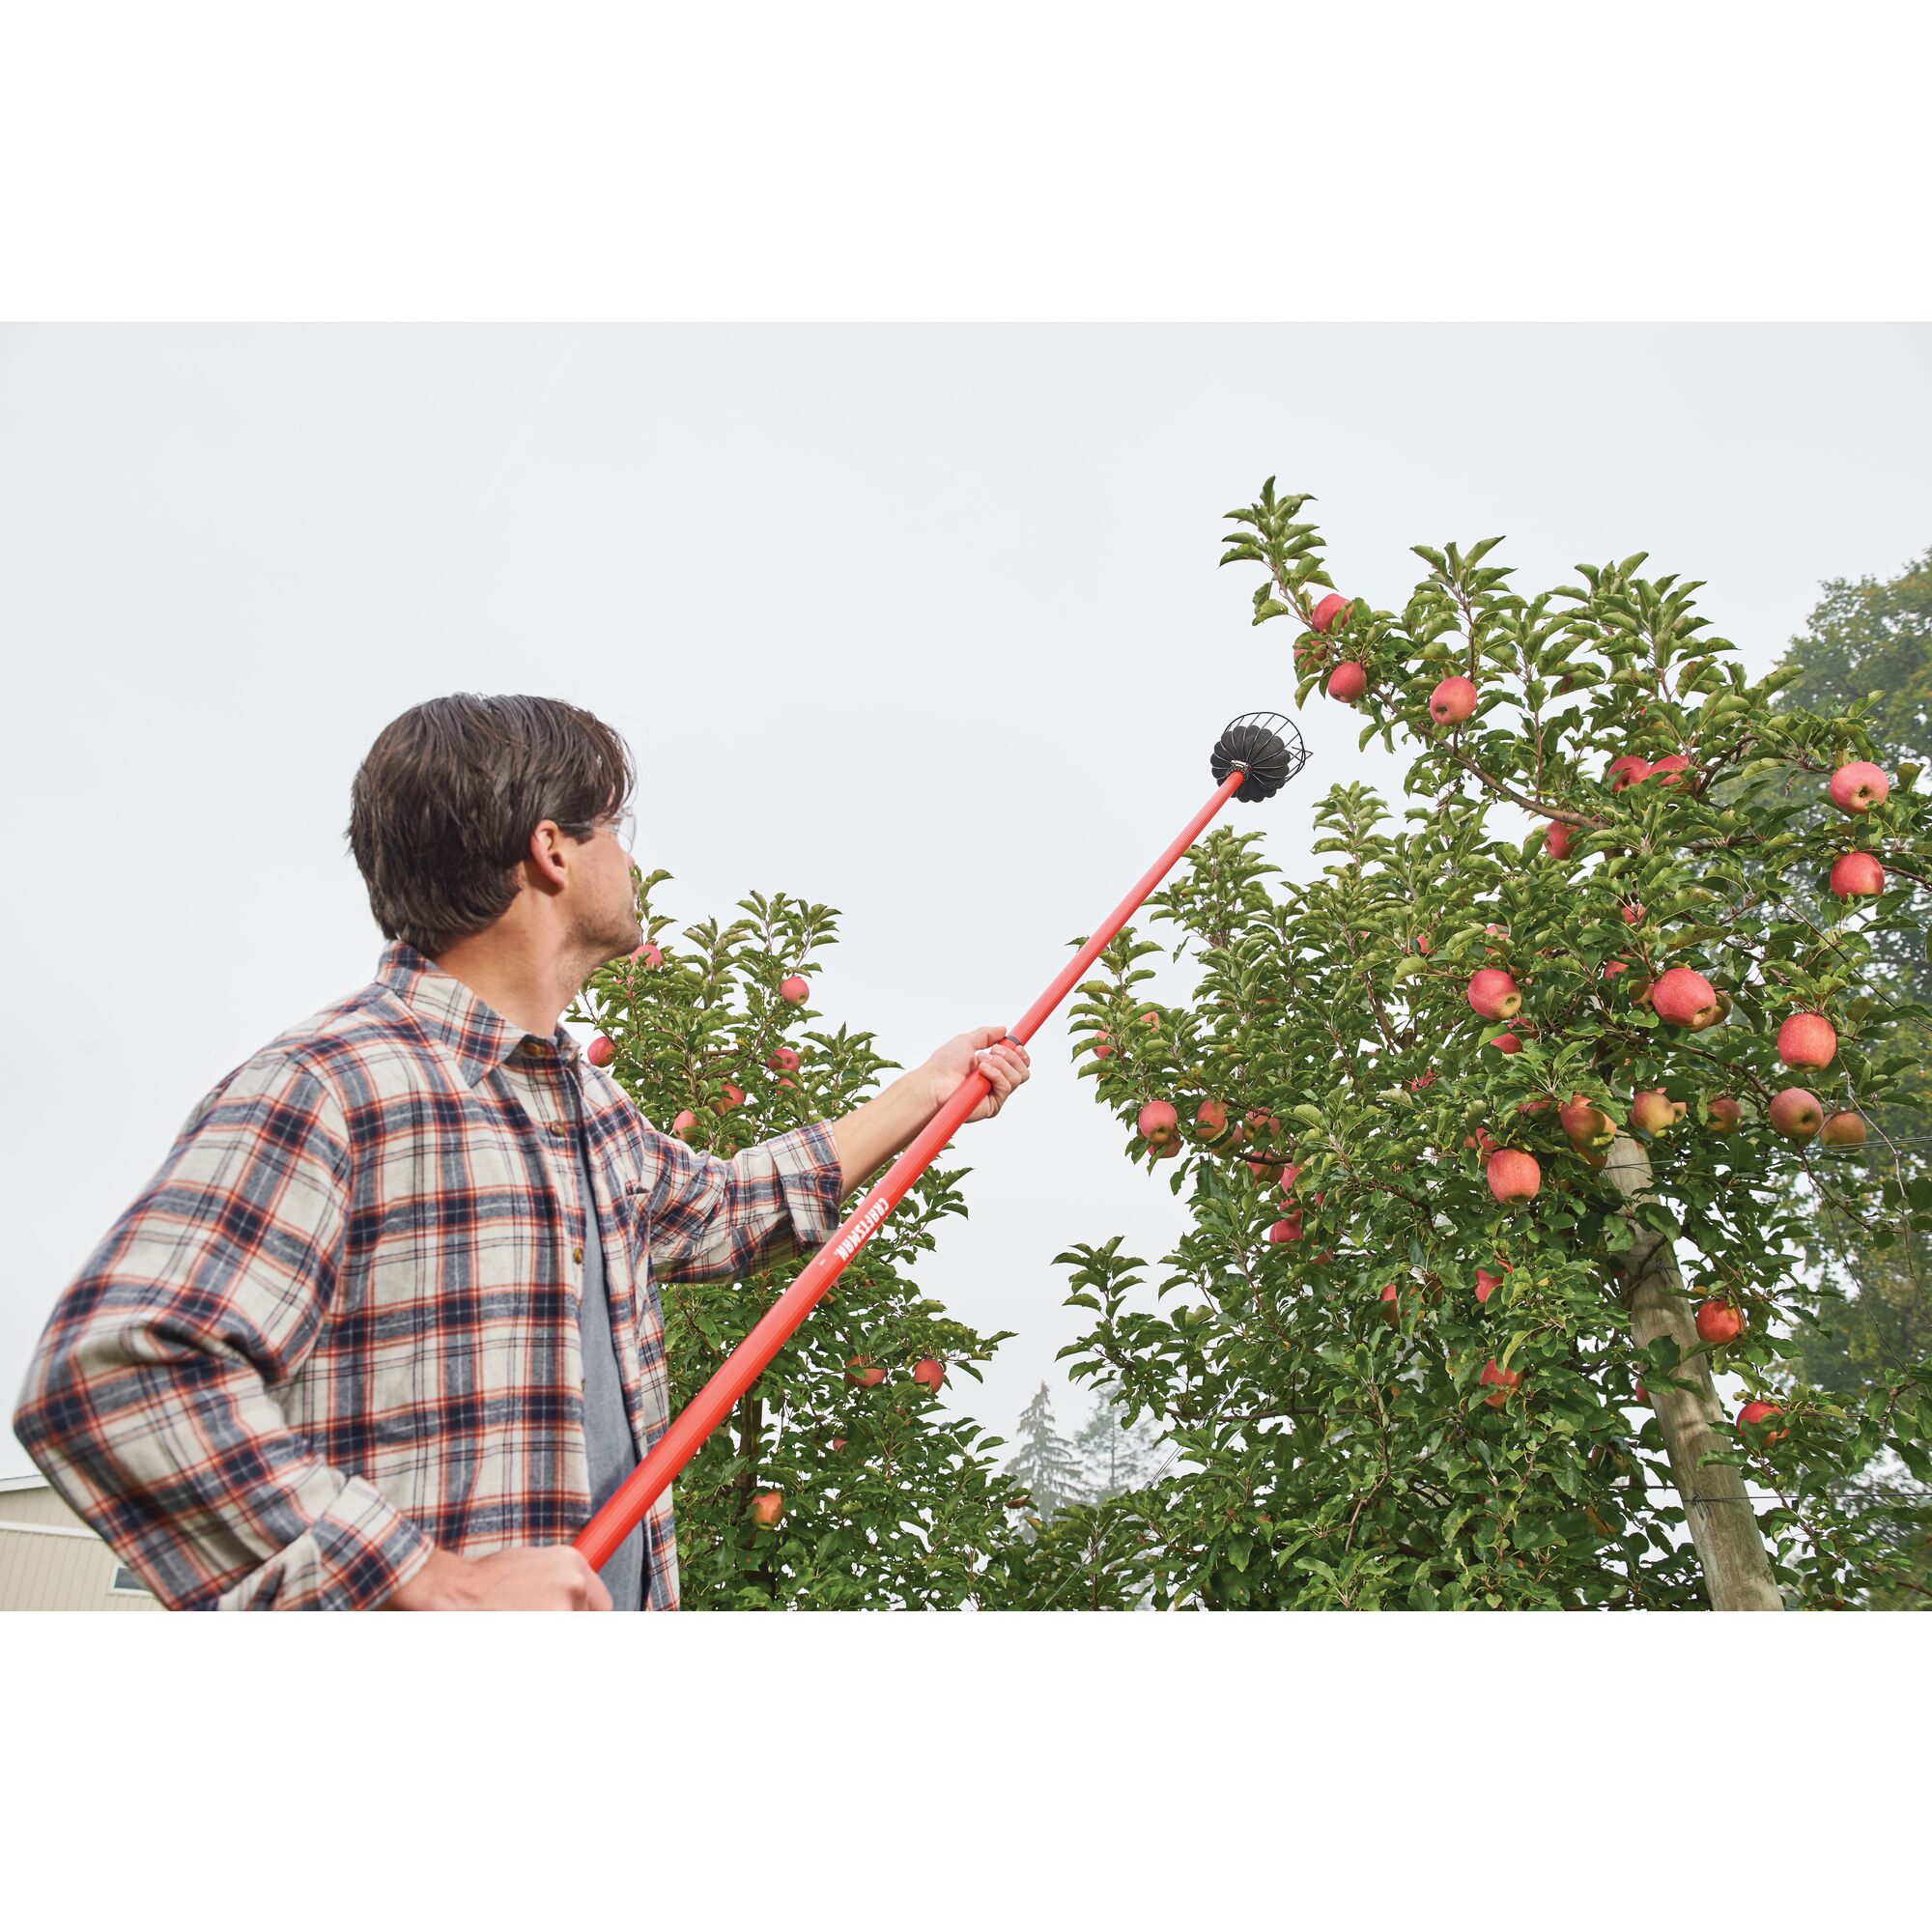 Fruit harvester being used to harvest fruits from a tree by a person.